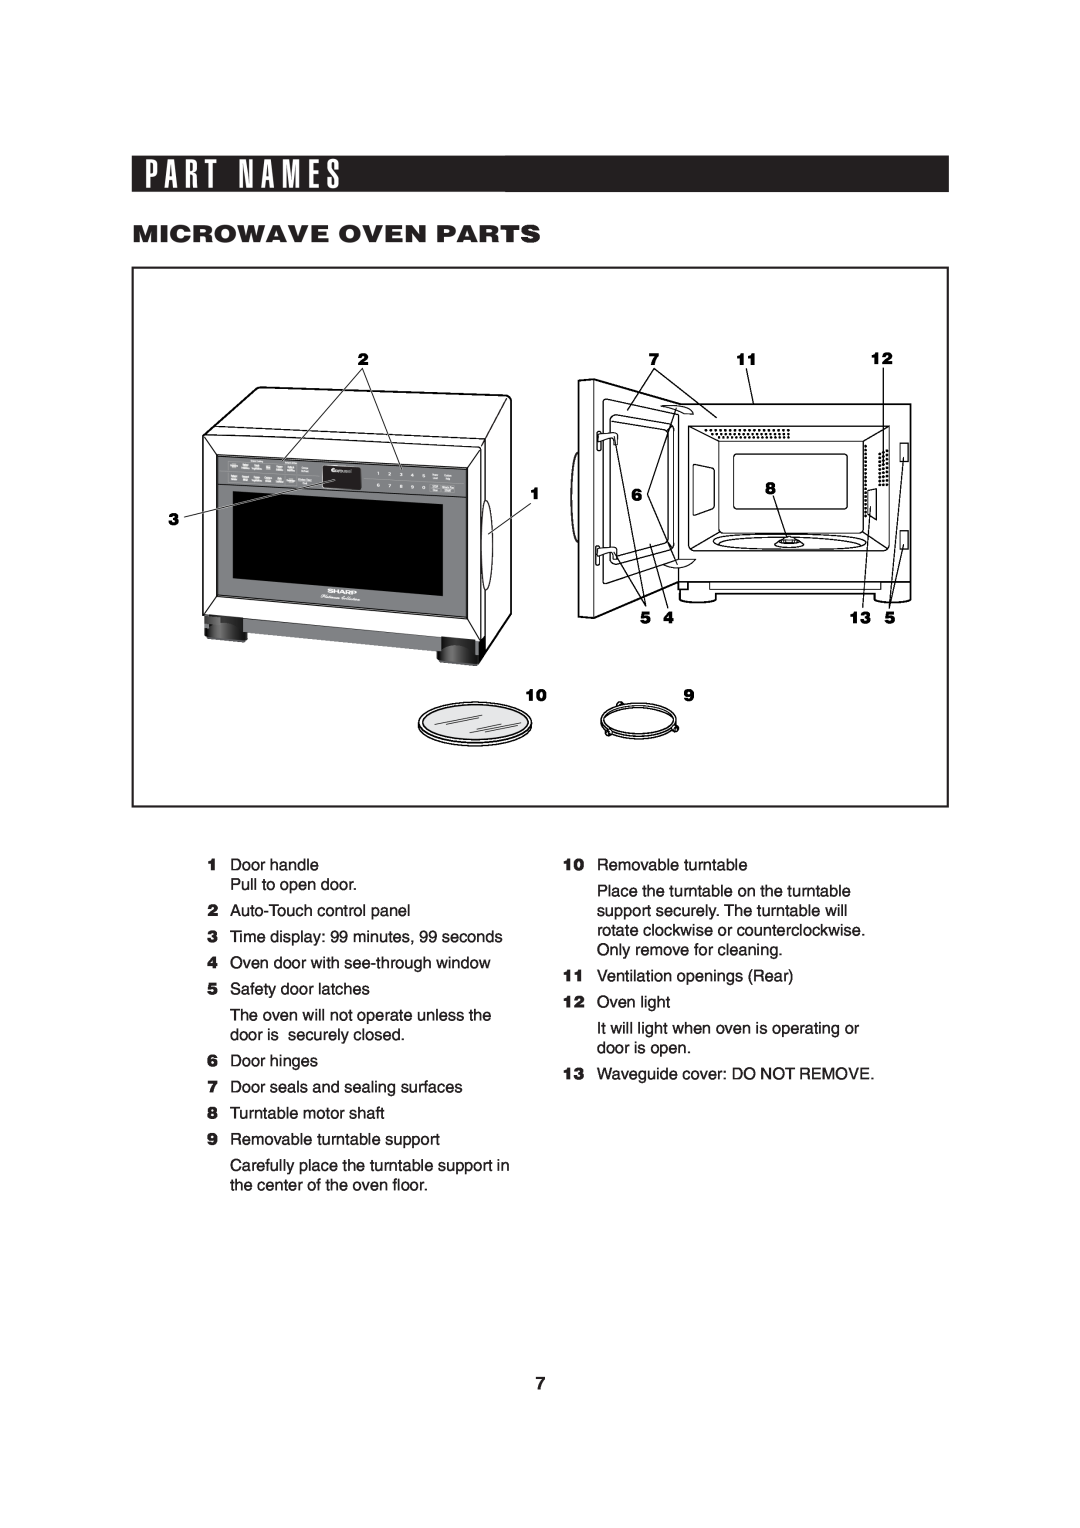 Sharp R-370E operation manual P A R T N A M E S, Microwave Oven Parts 